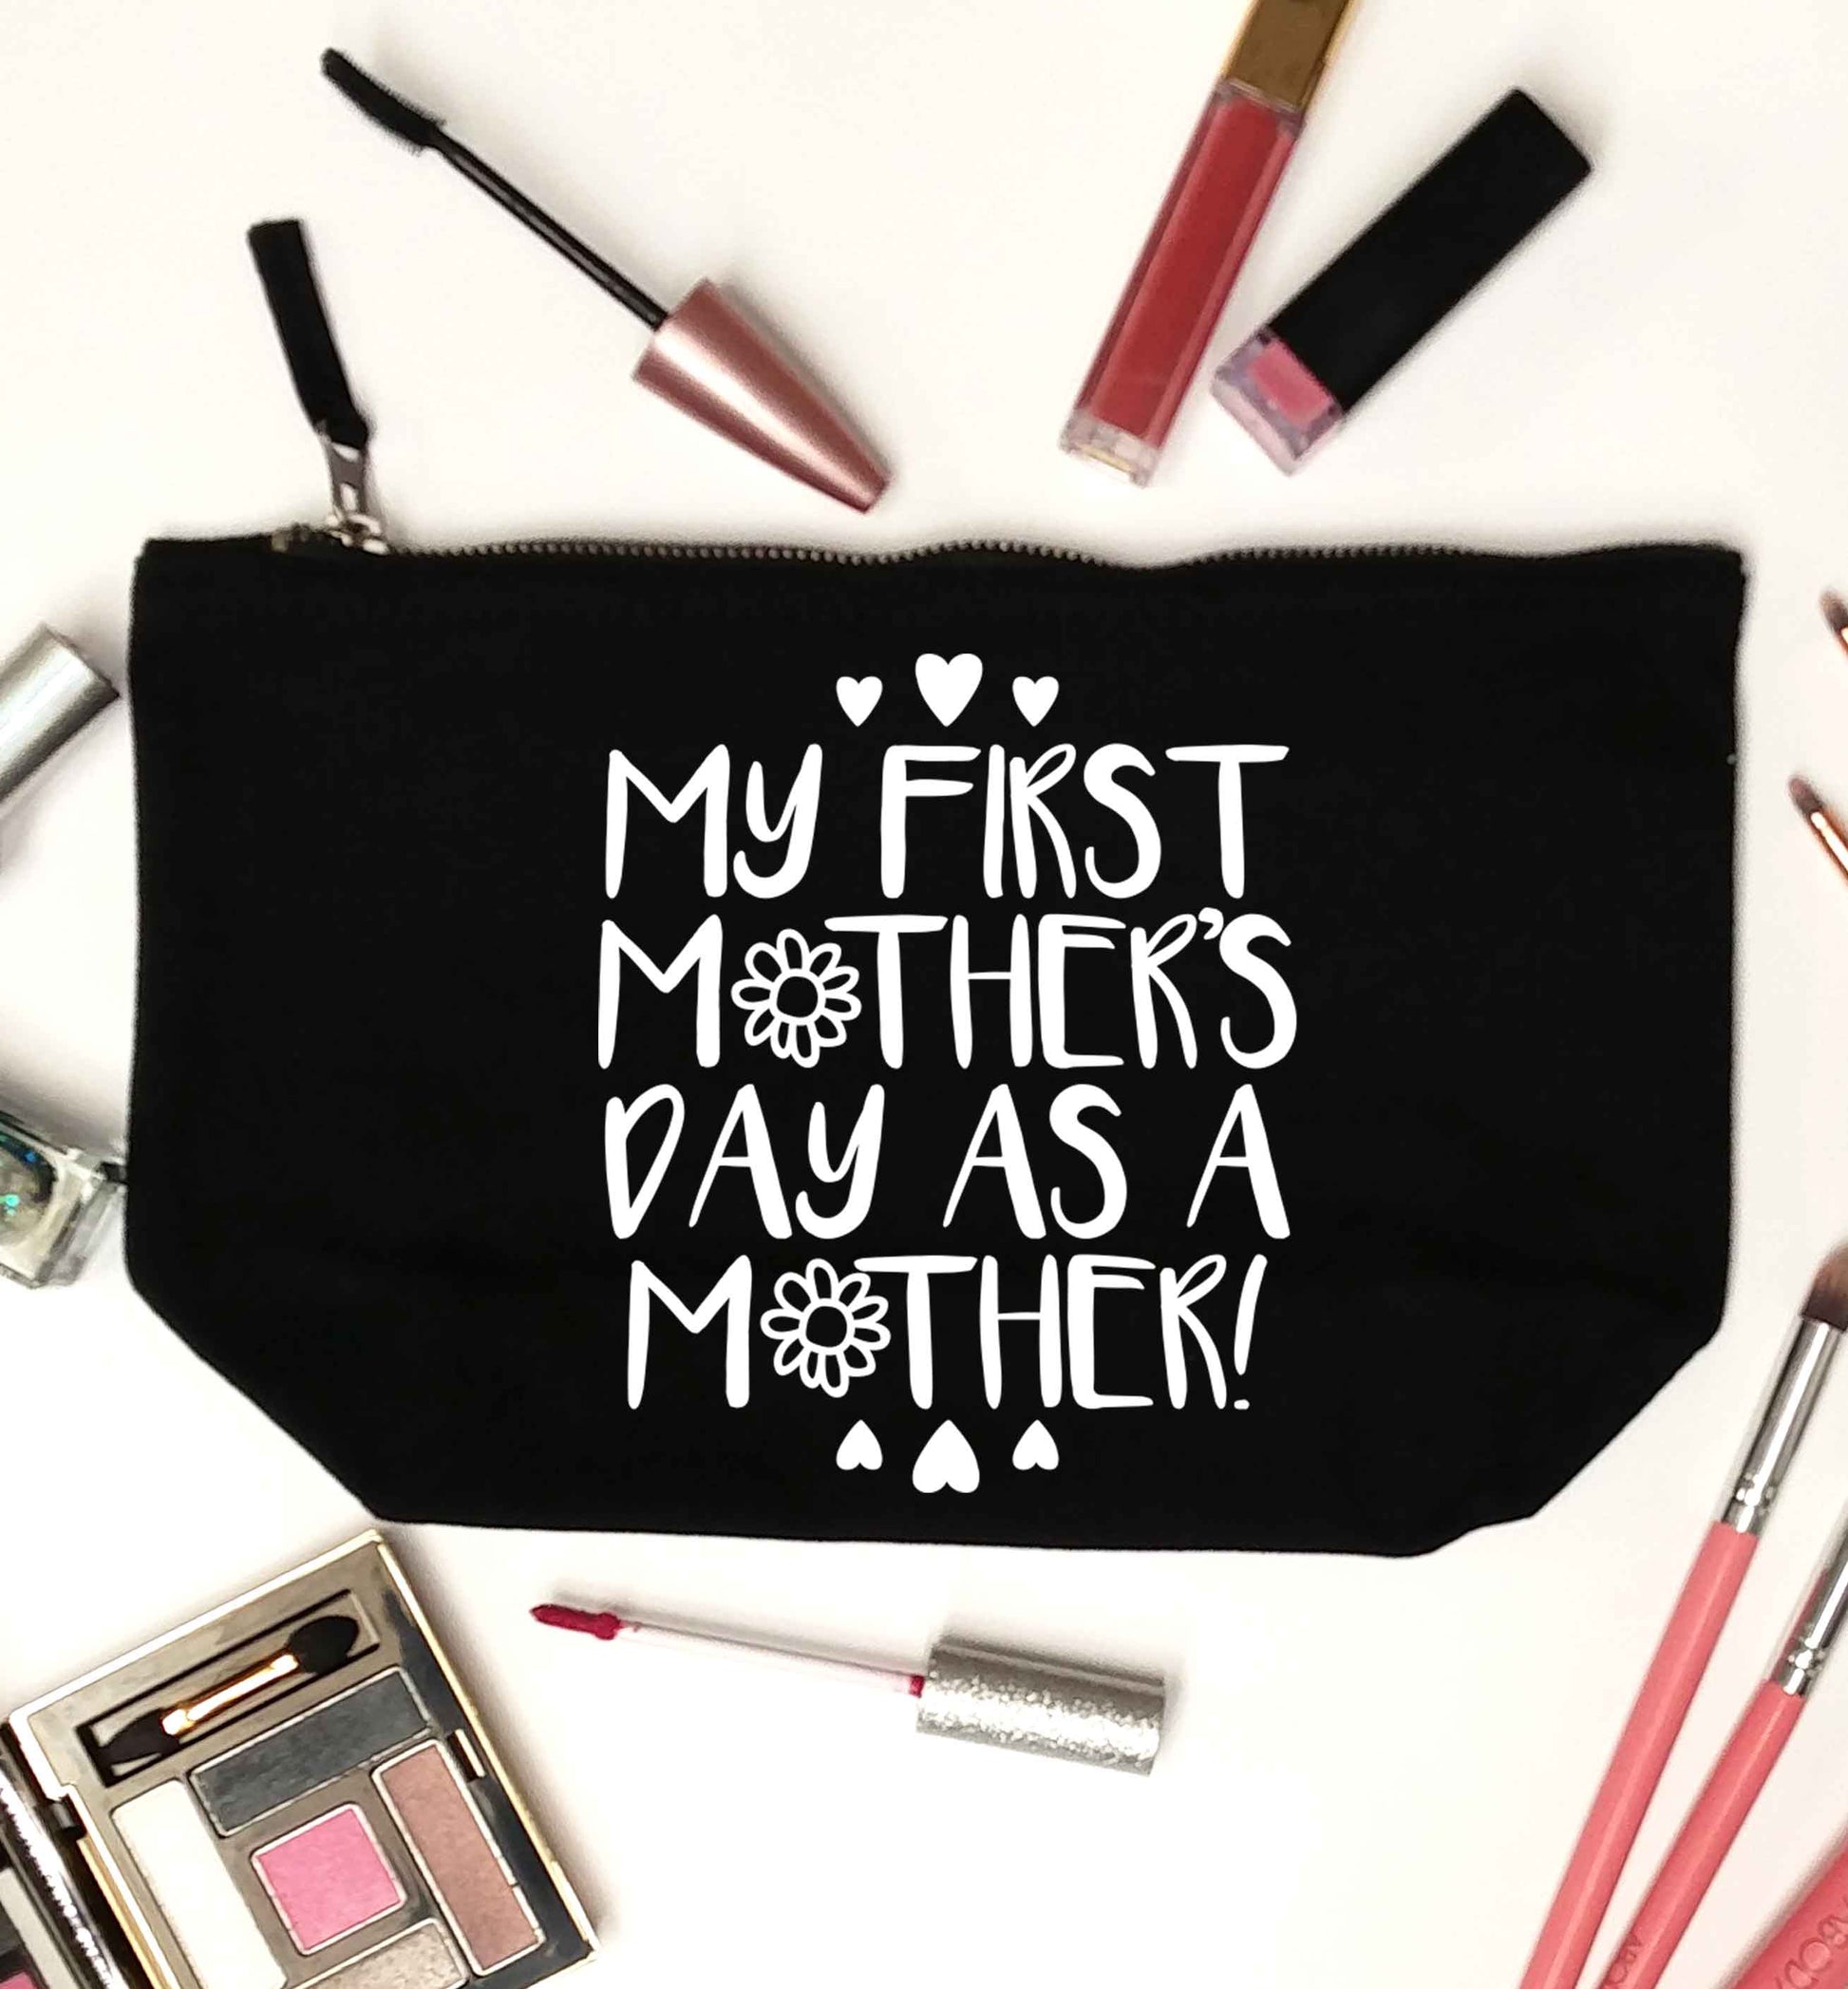 It's my first mother's day as a mother black makeup bag